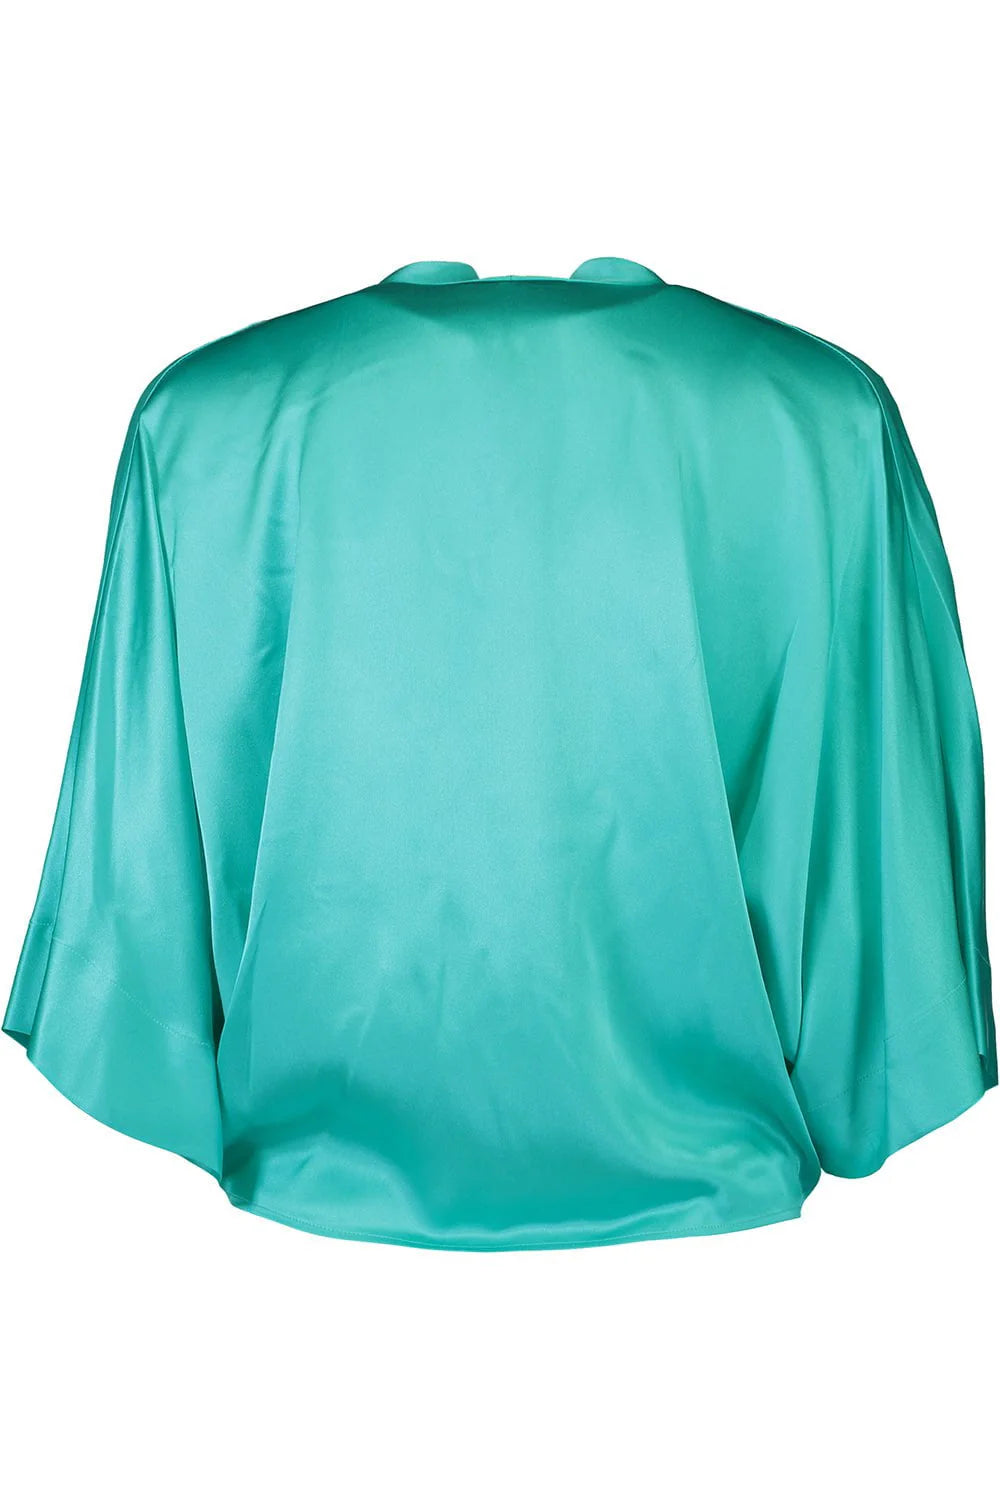 Dolman Tie Front Blouse in Turquoise